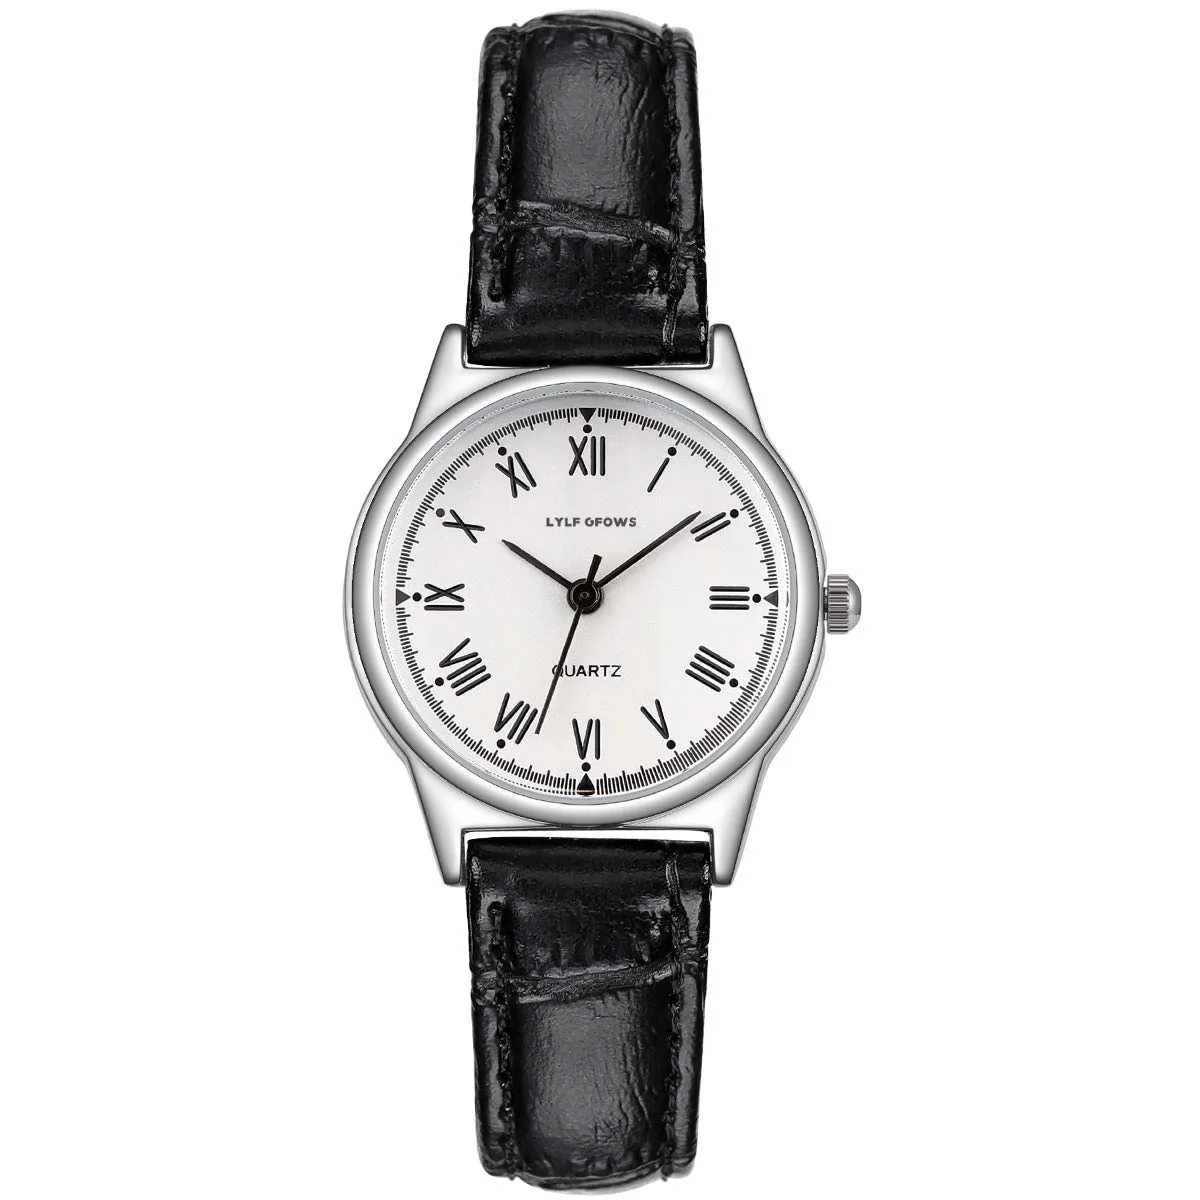 LYLF GFOWS Women Wrist Watches, Women Leather Wrist Watches, Simple Women Watches, Round Dial Easy to Read Small Face Watch